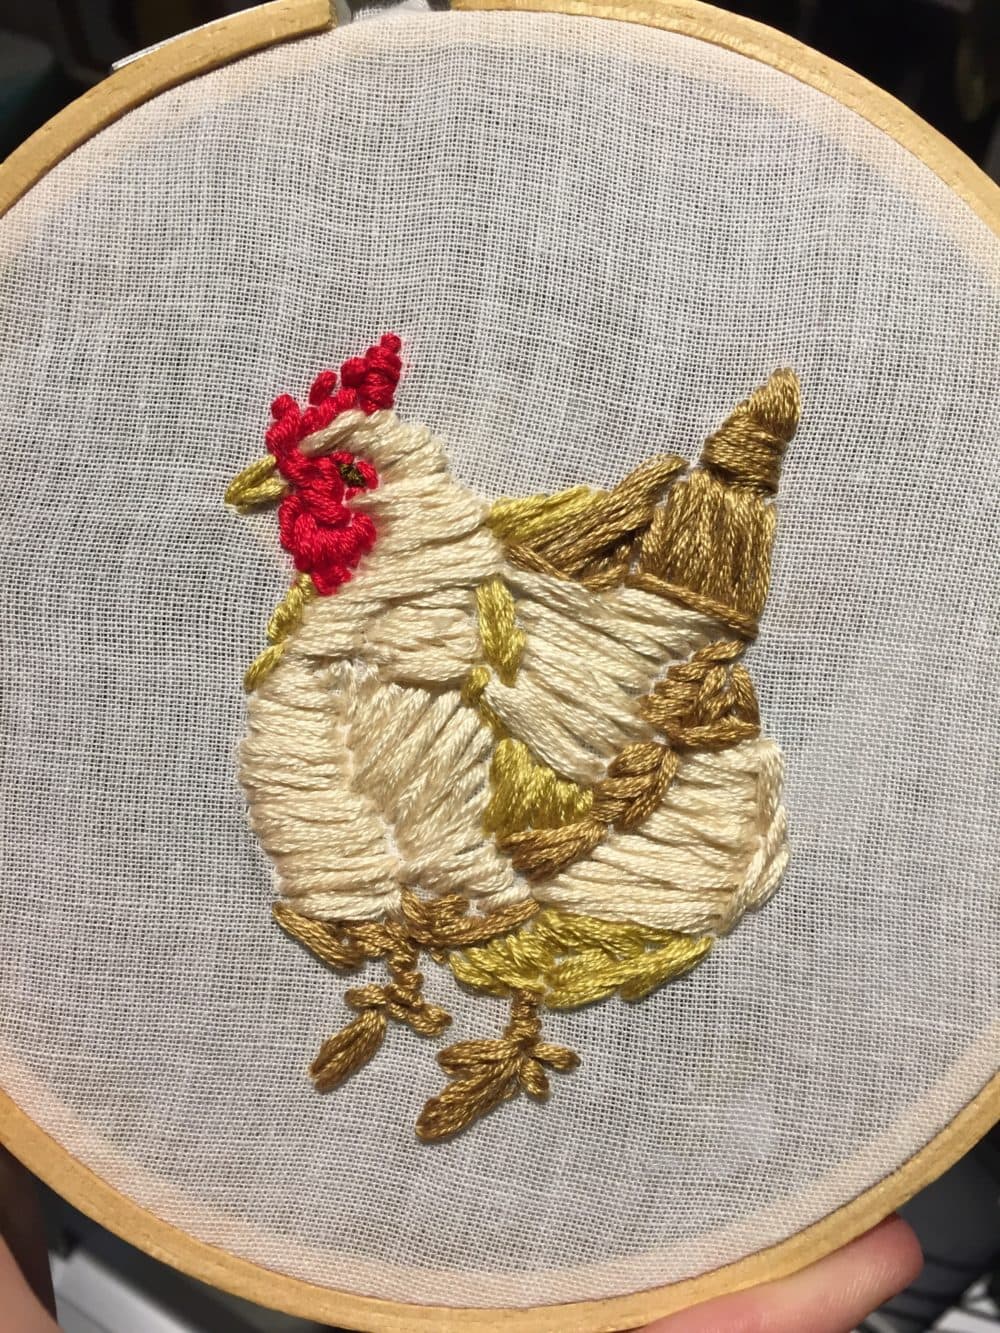 An embroidered chicken by Mad Beaubien. (Courtesy Chuck Stigliano)